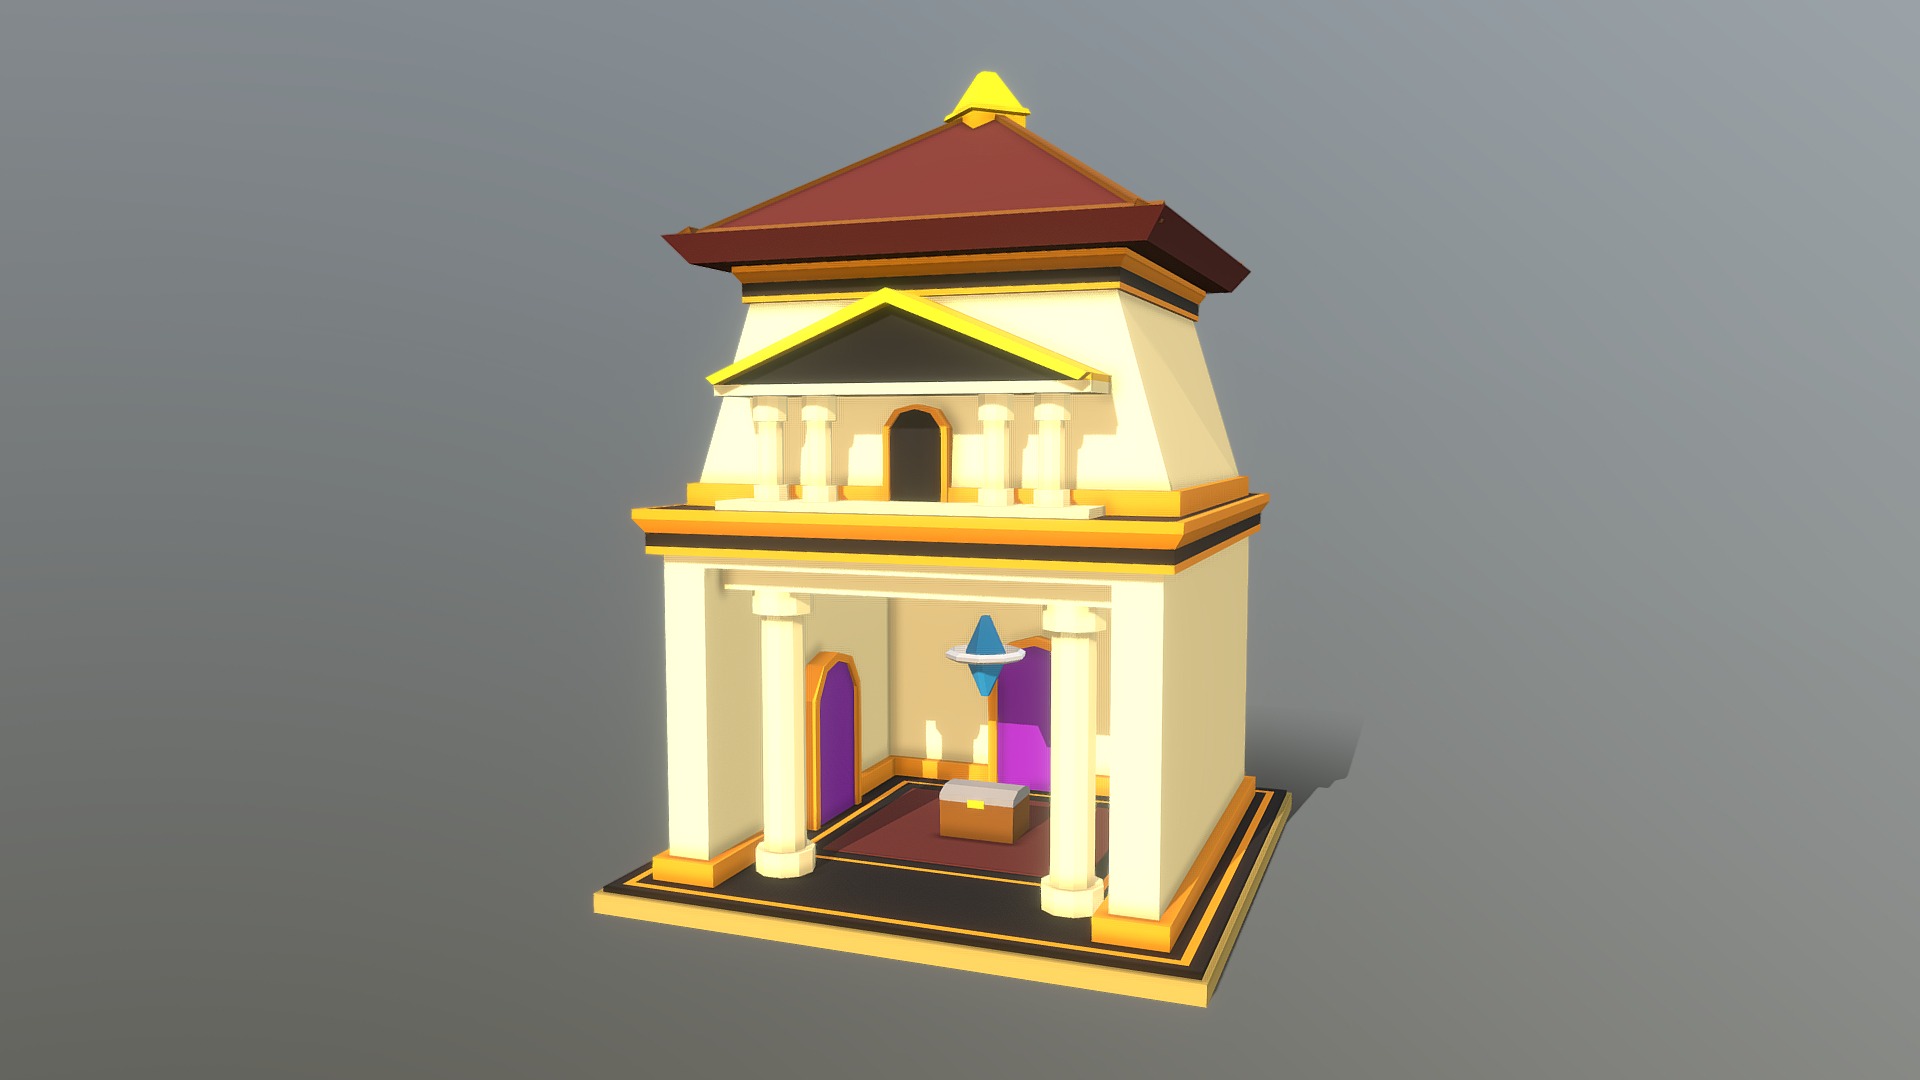 3D model HIE Save Point N1 - This is a 3D model of the HIE Save Point N1. The 3D model is about a toy house with a blue roof.